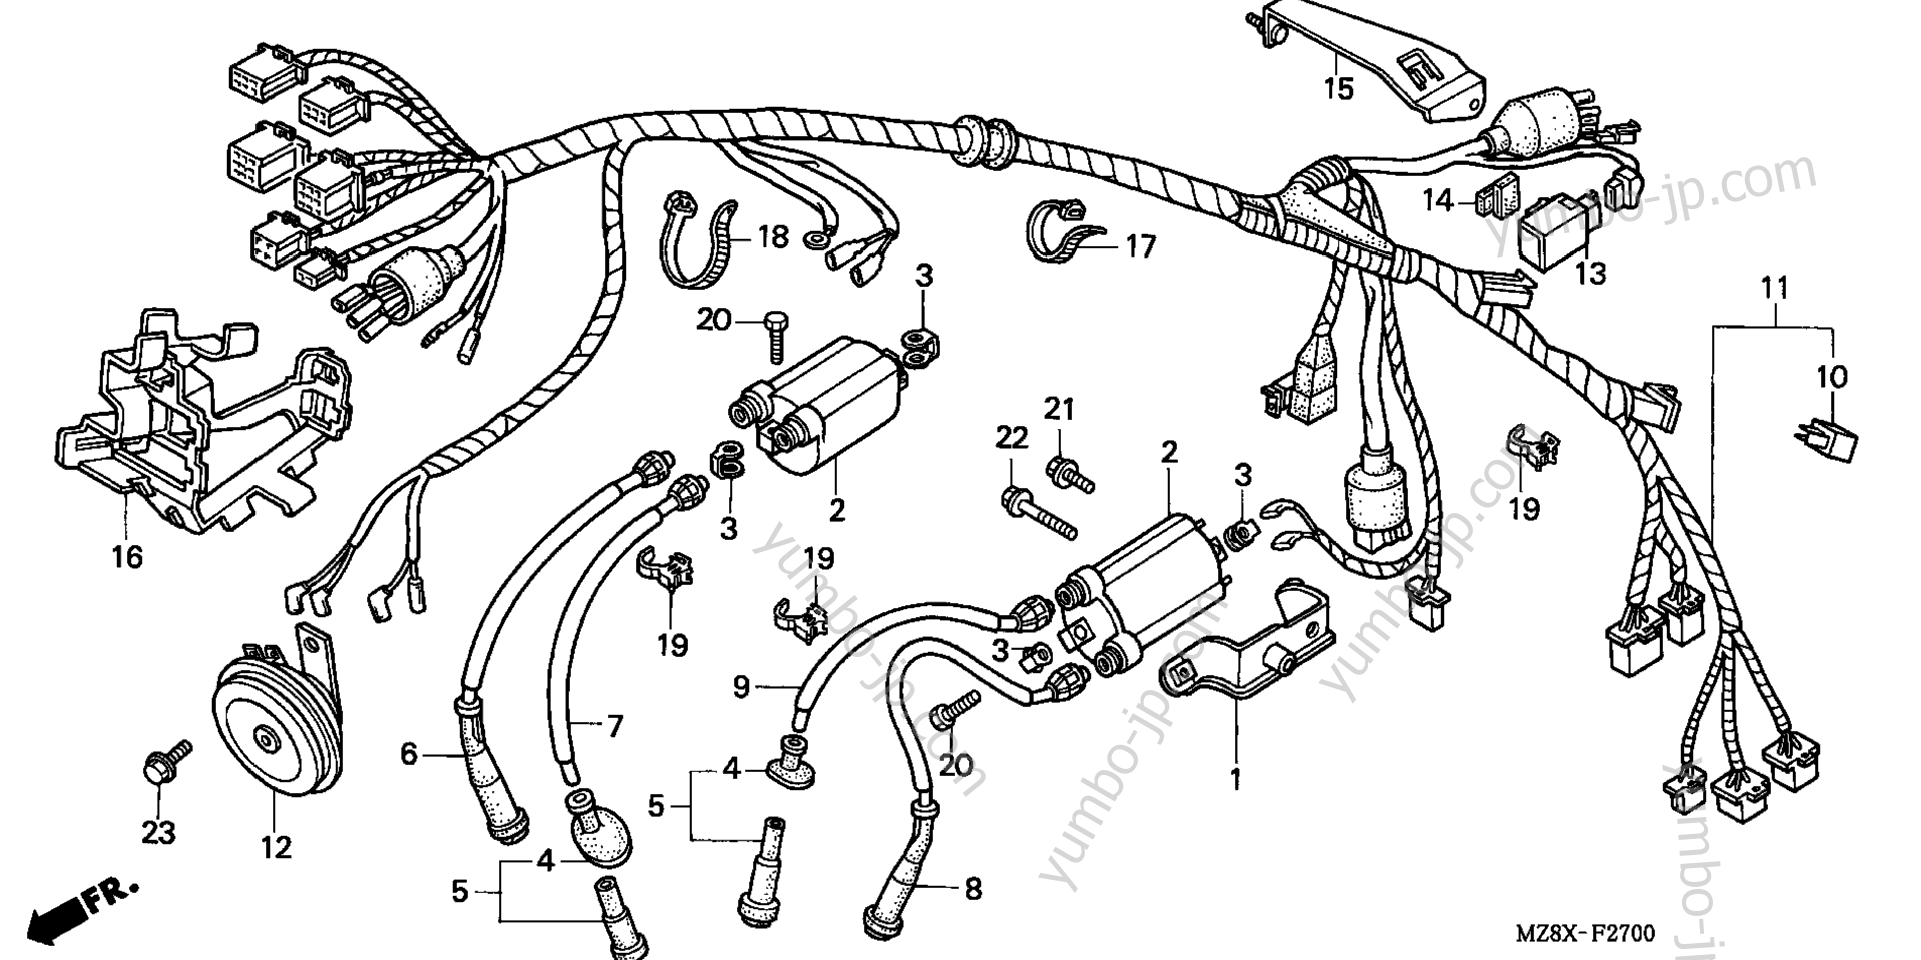 WIRE HARNESS for motorcycles HONDA VT600CD AC/A 2002 year